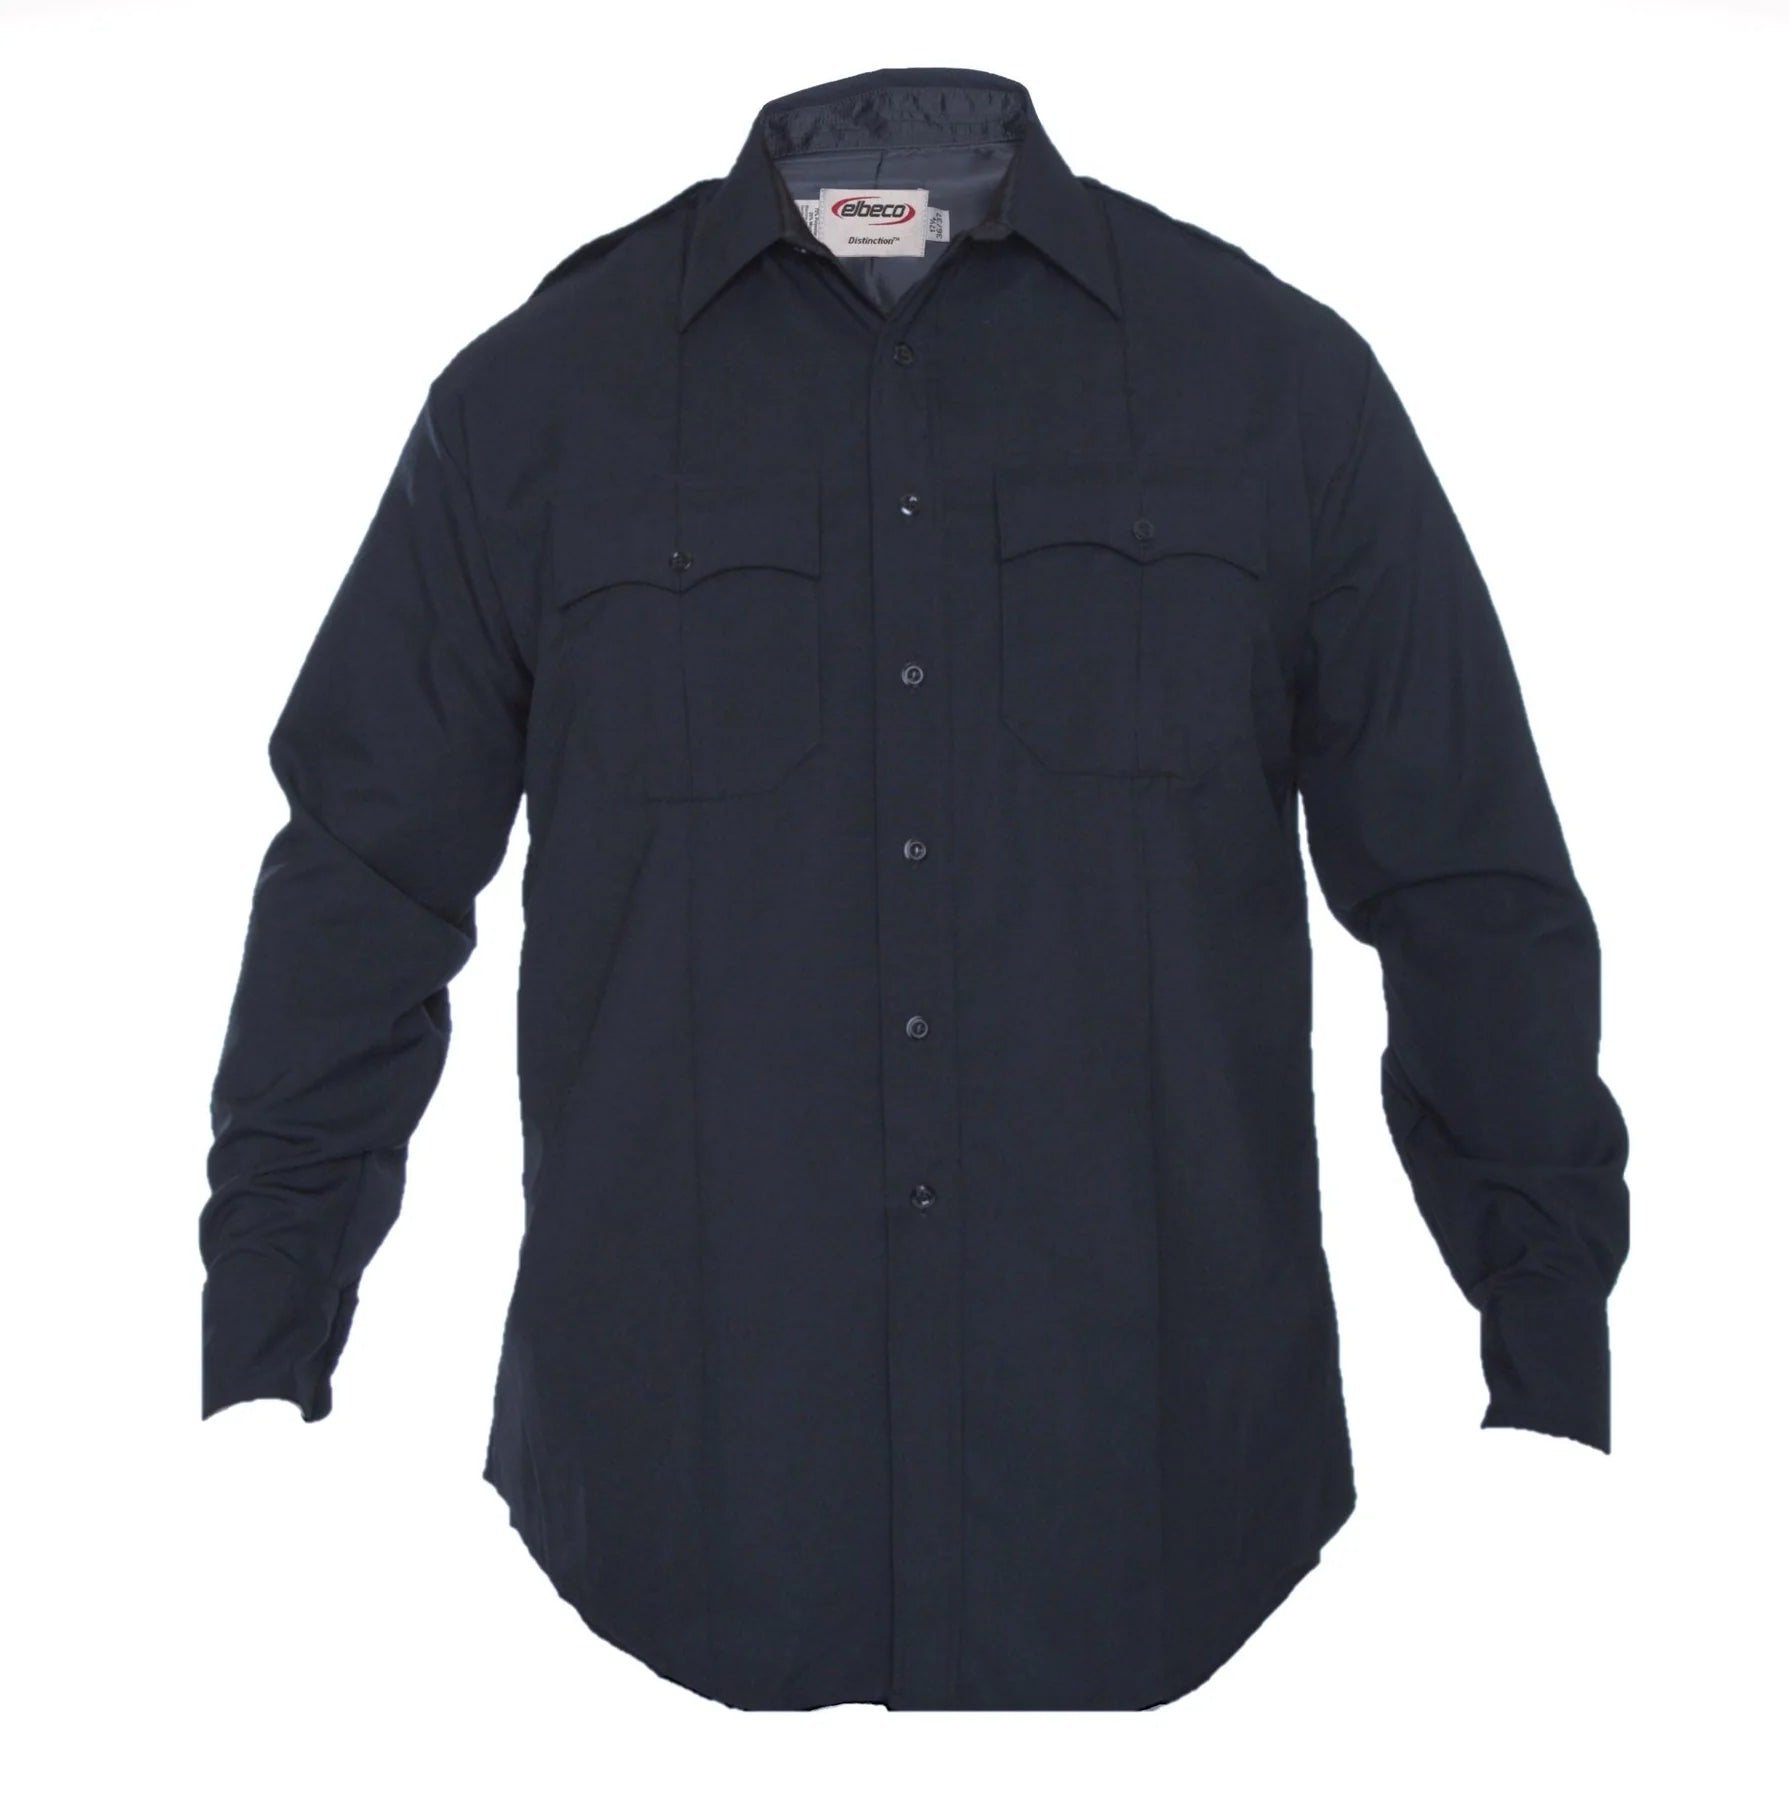 Elbeco Distinction Long Sleeve Shirt - Midnight Navy 850N - Clothing & Accessories